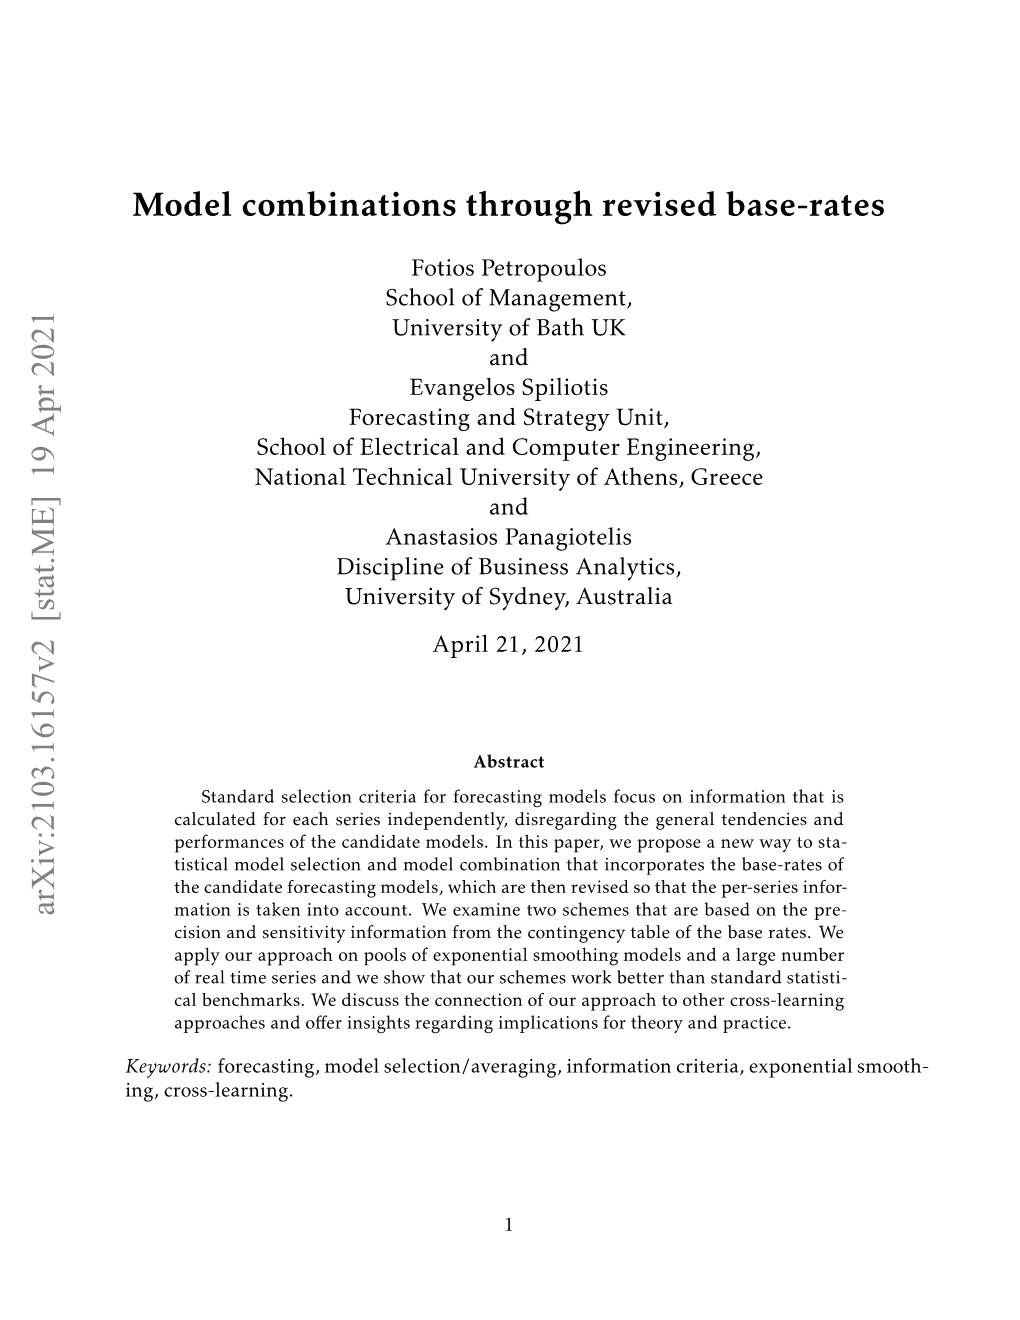 19 Apr 2021 Model Combinations Through Revised Base-Rates